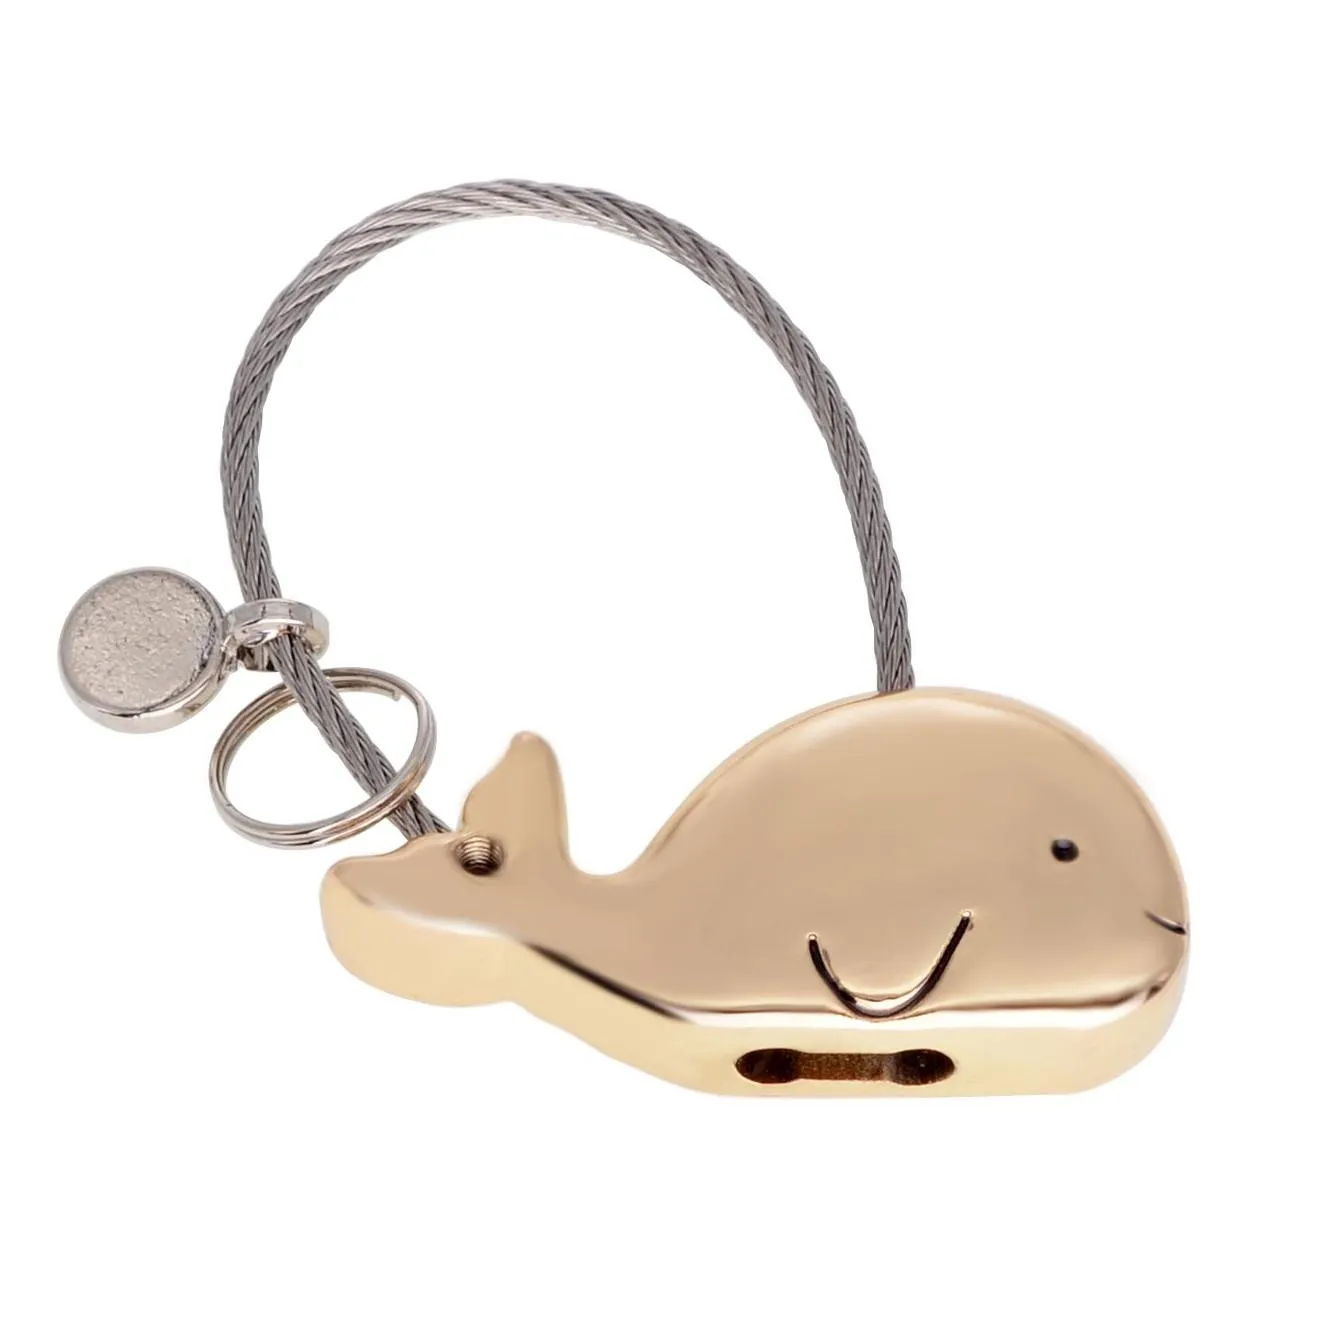 Little whale couple keychain Valentine`s day lovely gift key pendant wedding anniversary  expresses love